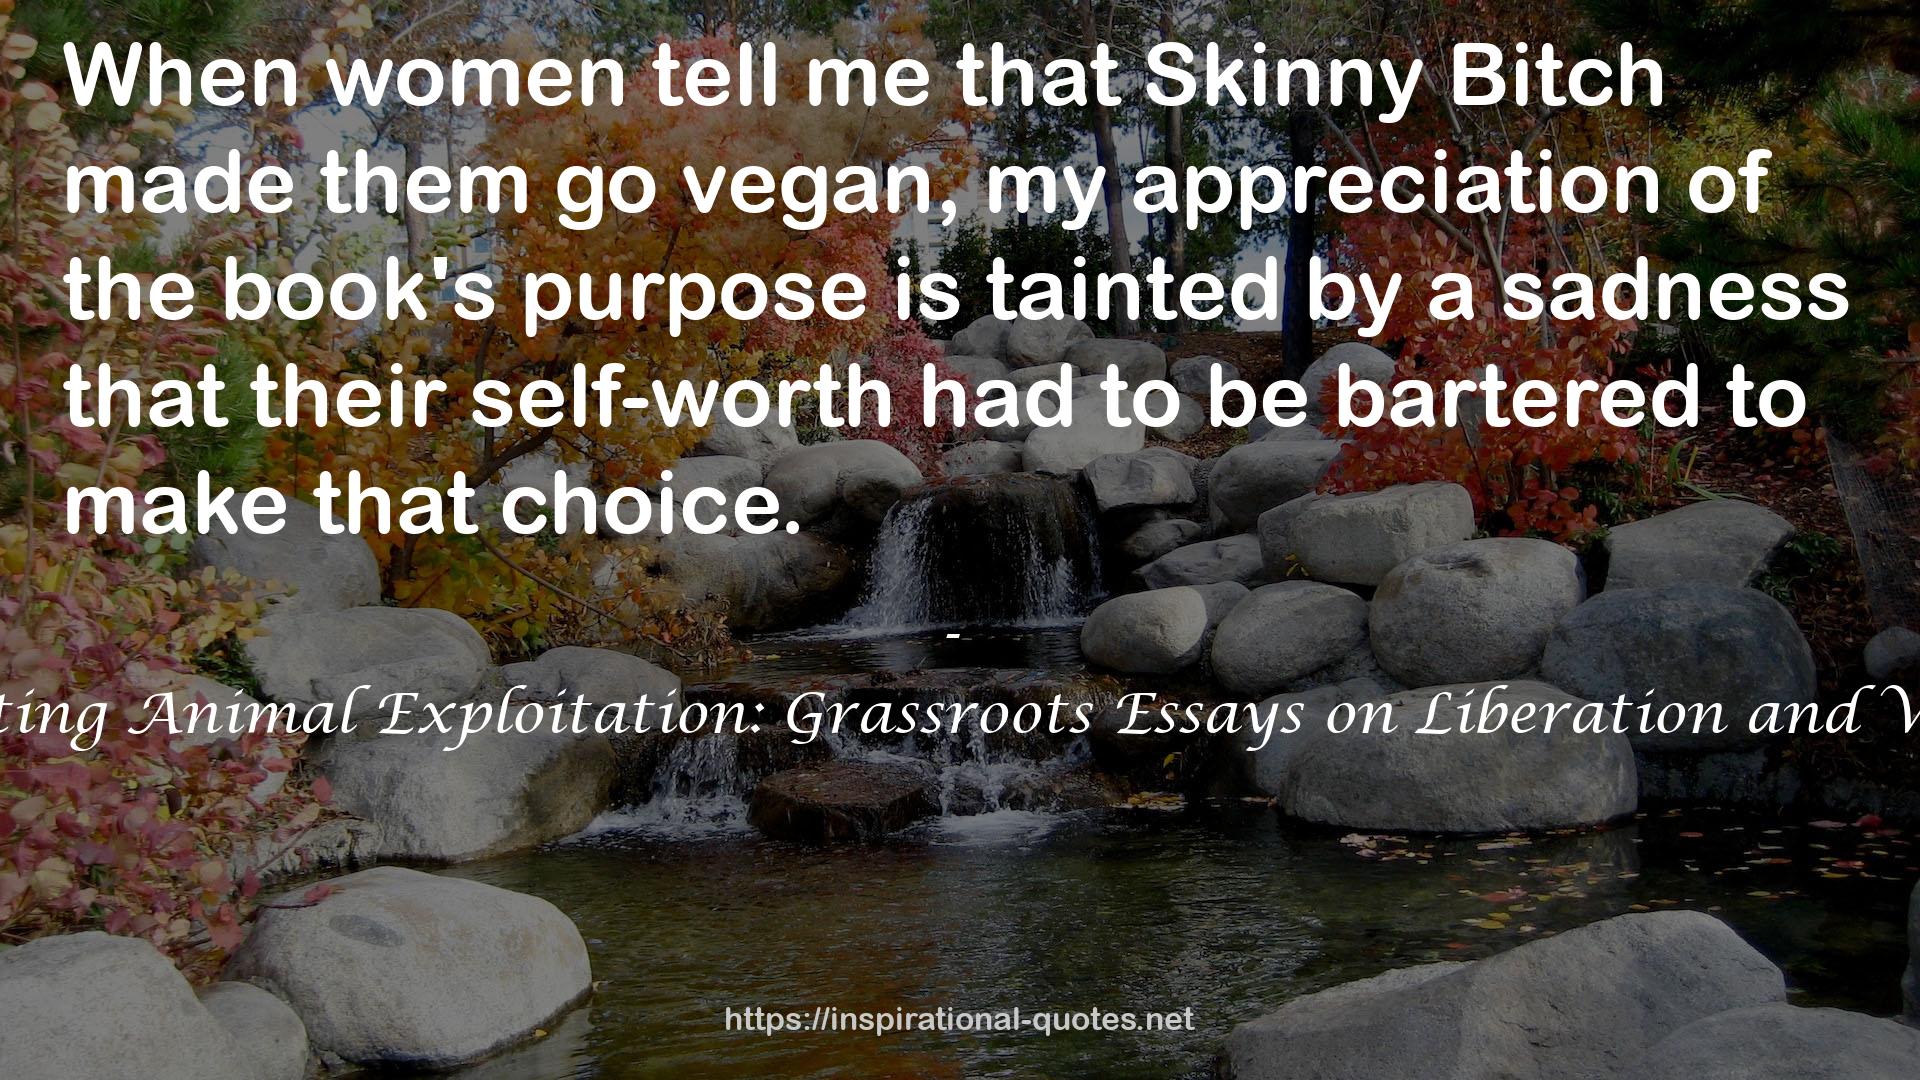 Confronting Animal Exploitation: Grassroots Essays on Liberation and Veganism QUOTES